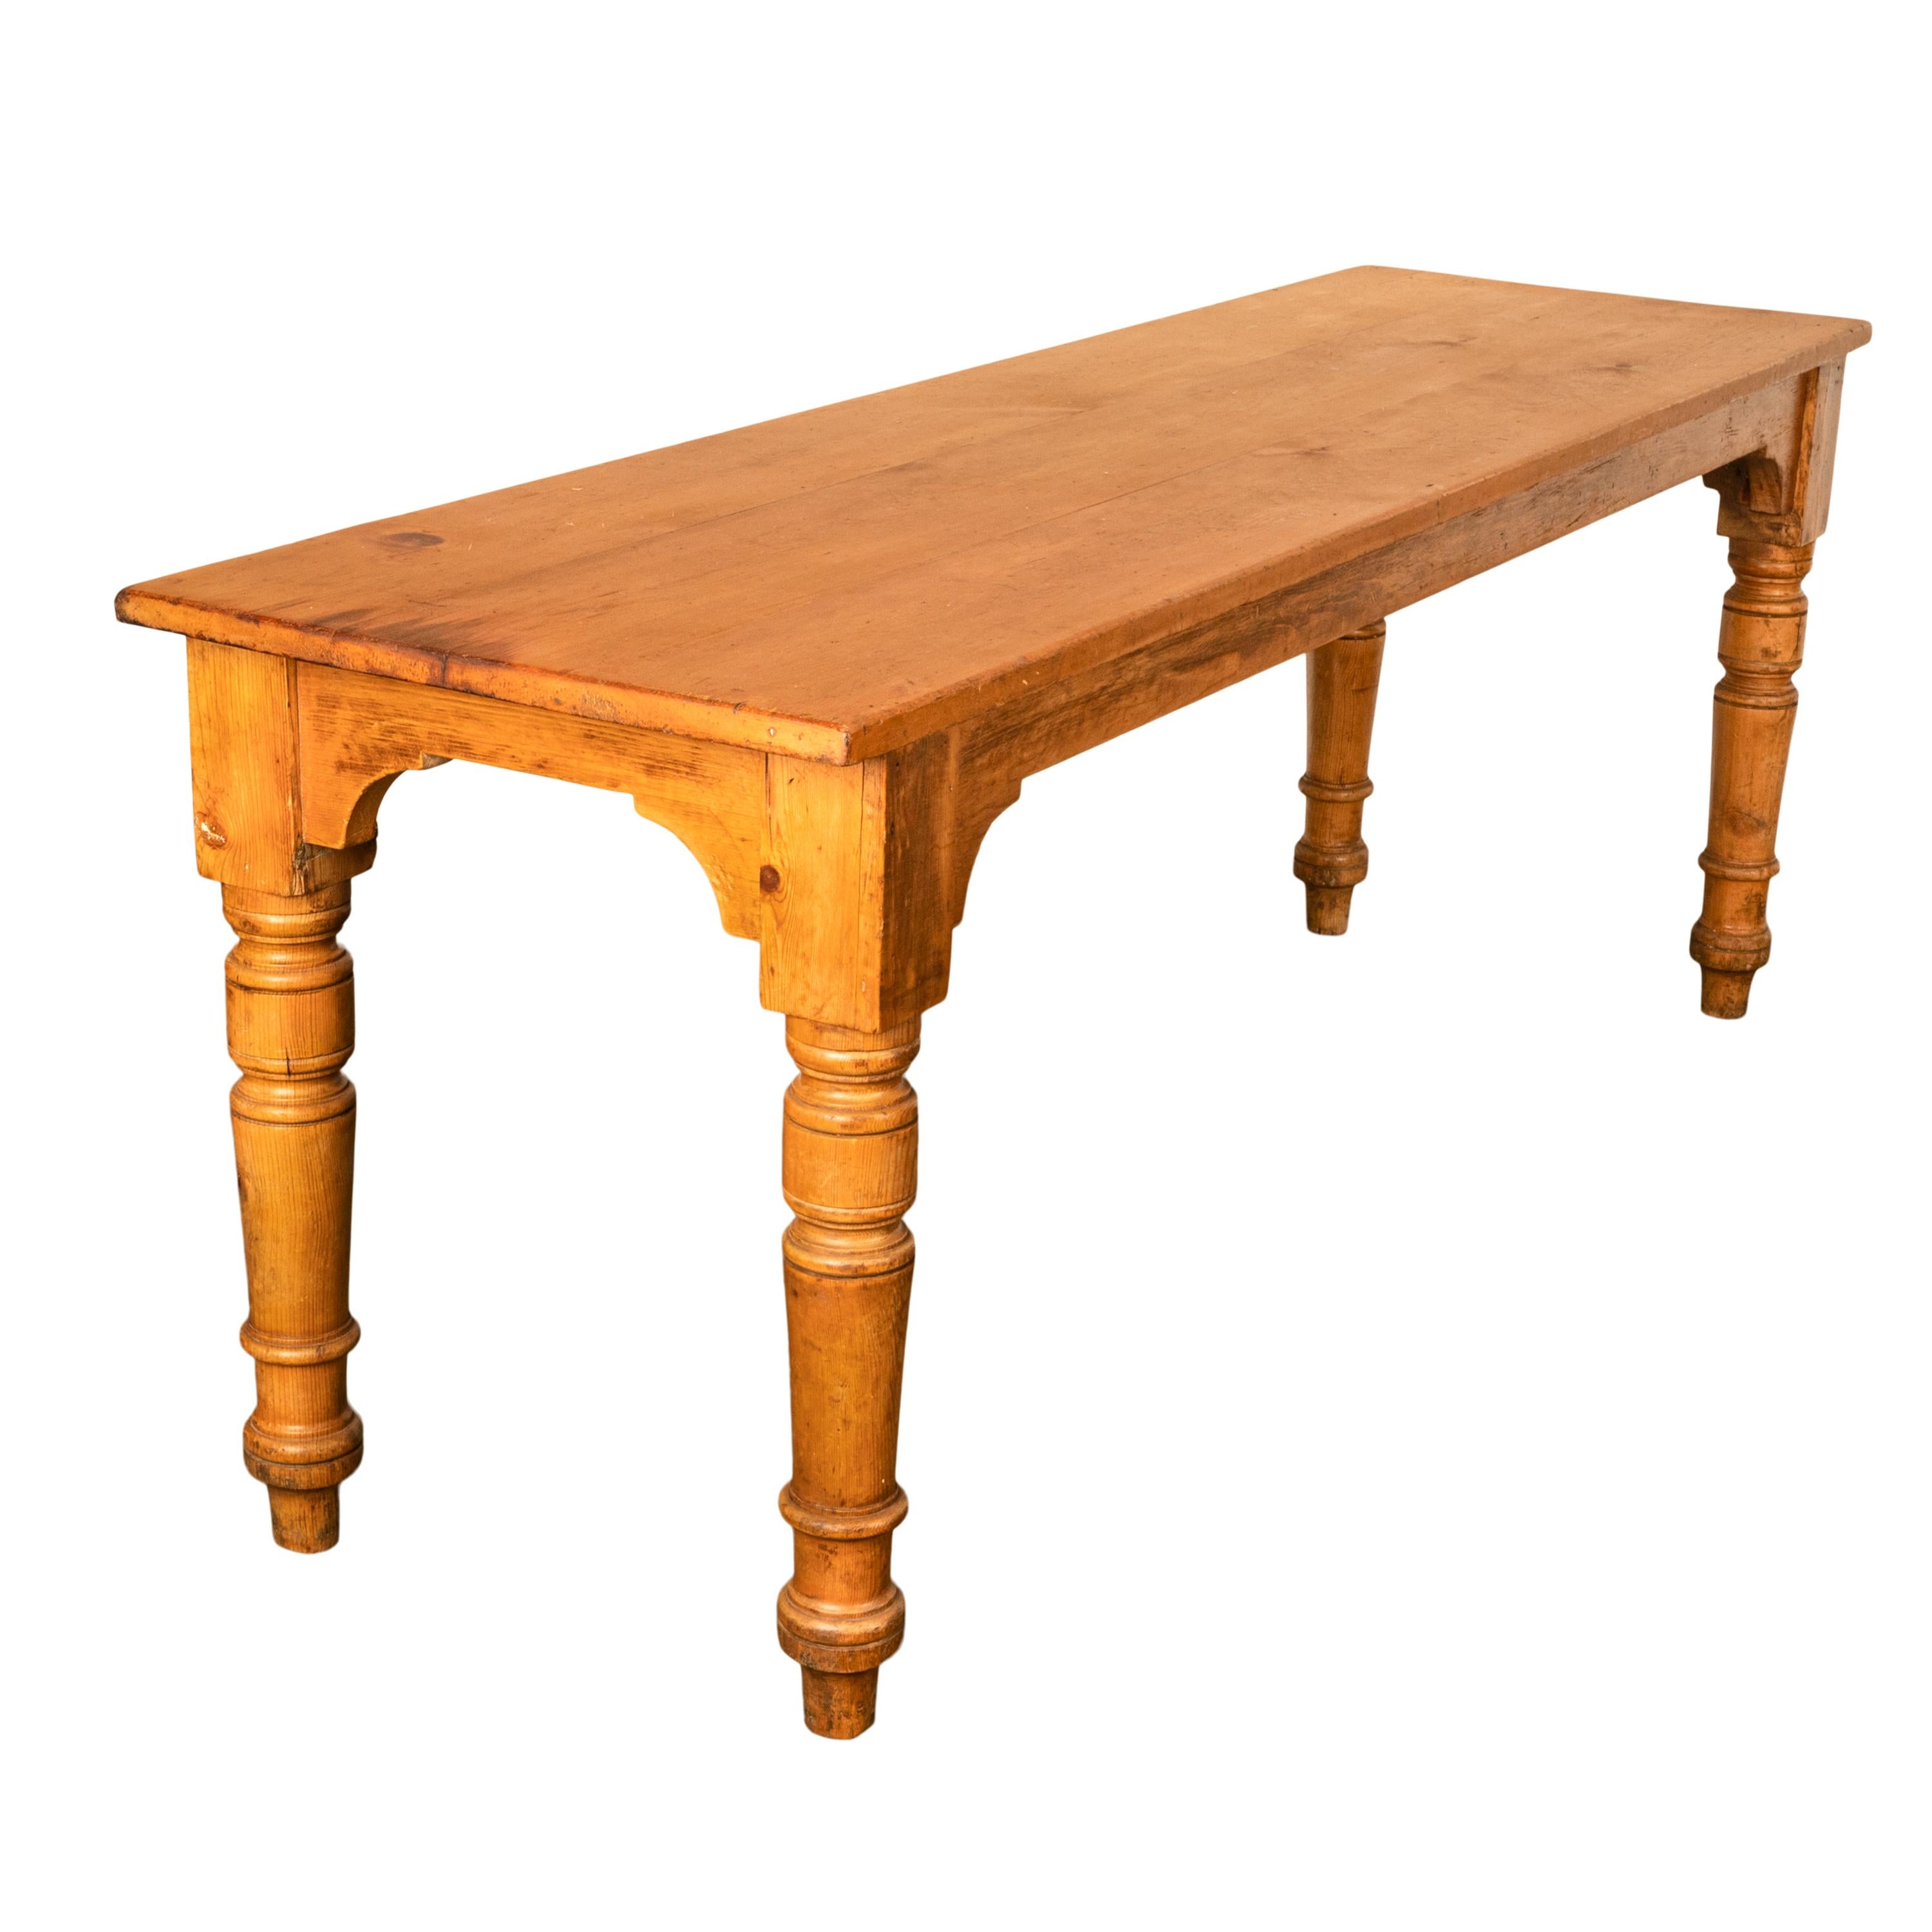 Antique 19th Century English Pine Country Farmhouse 8 seat Dining Table 1860 For Sale 3